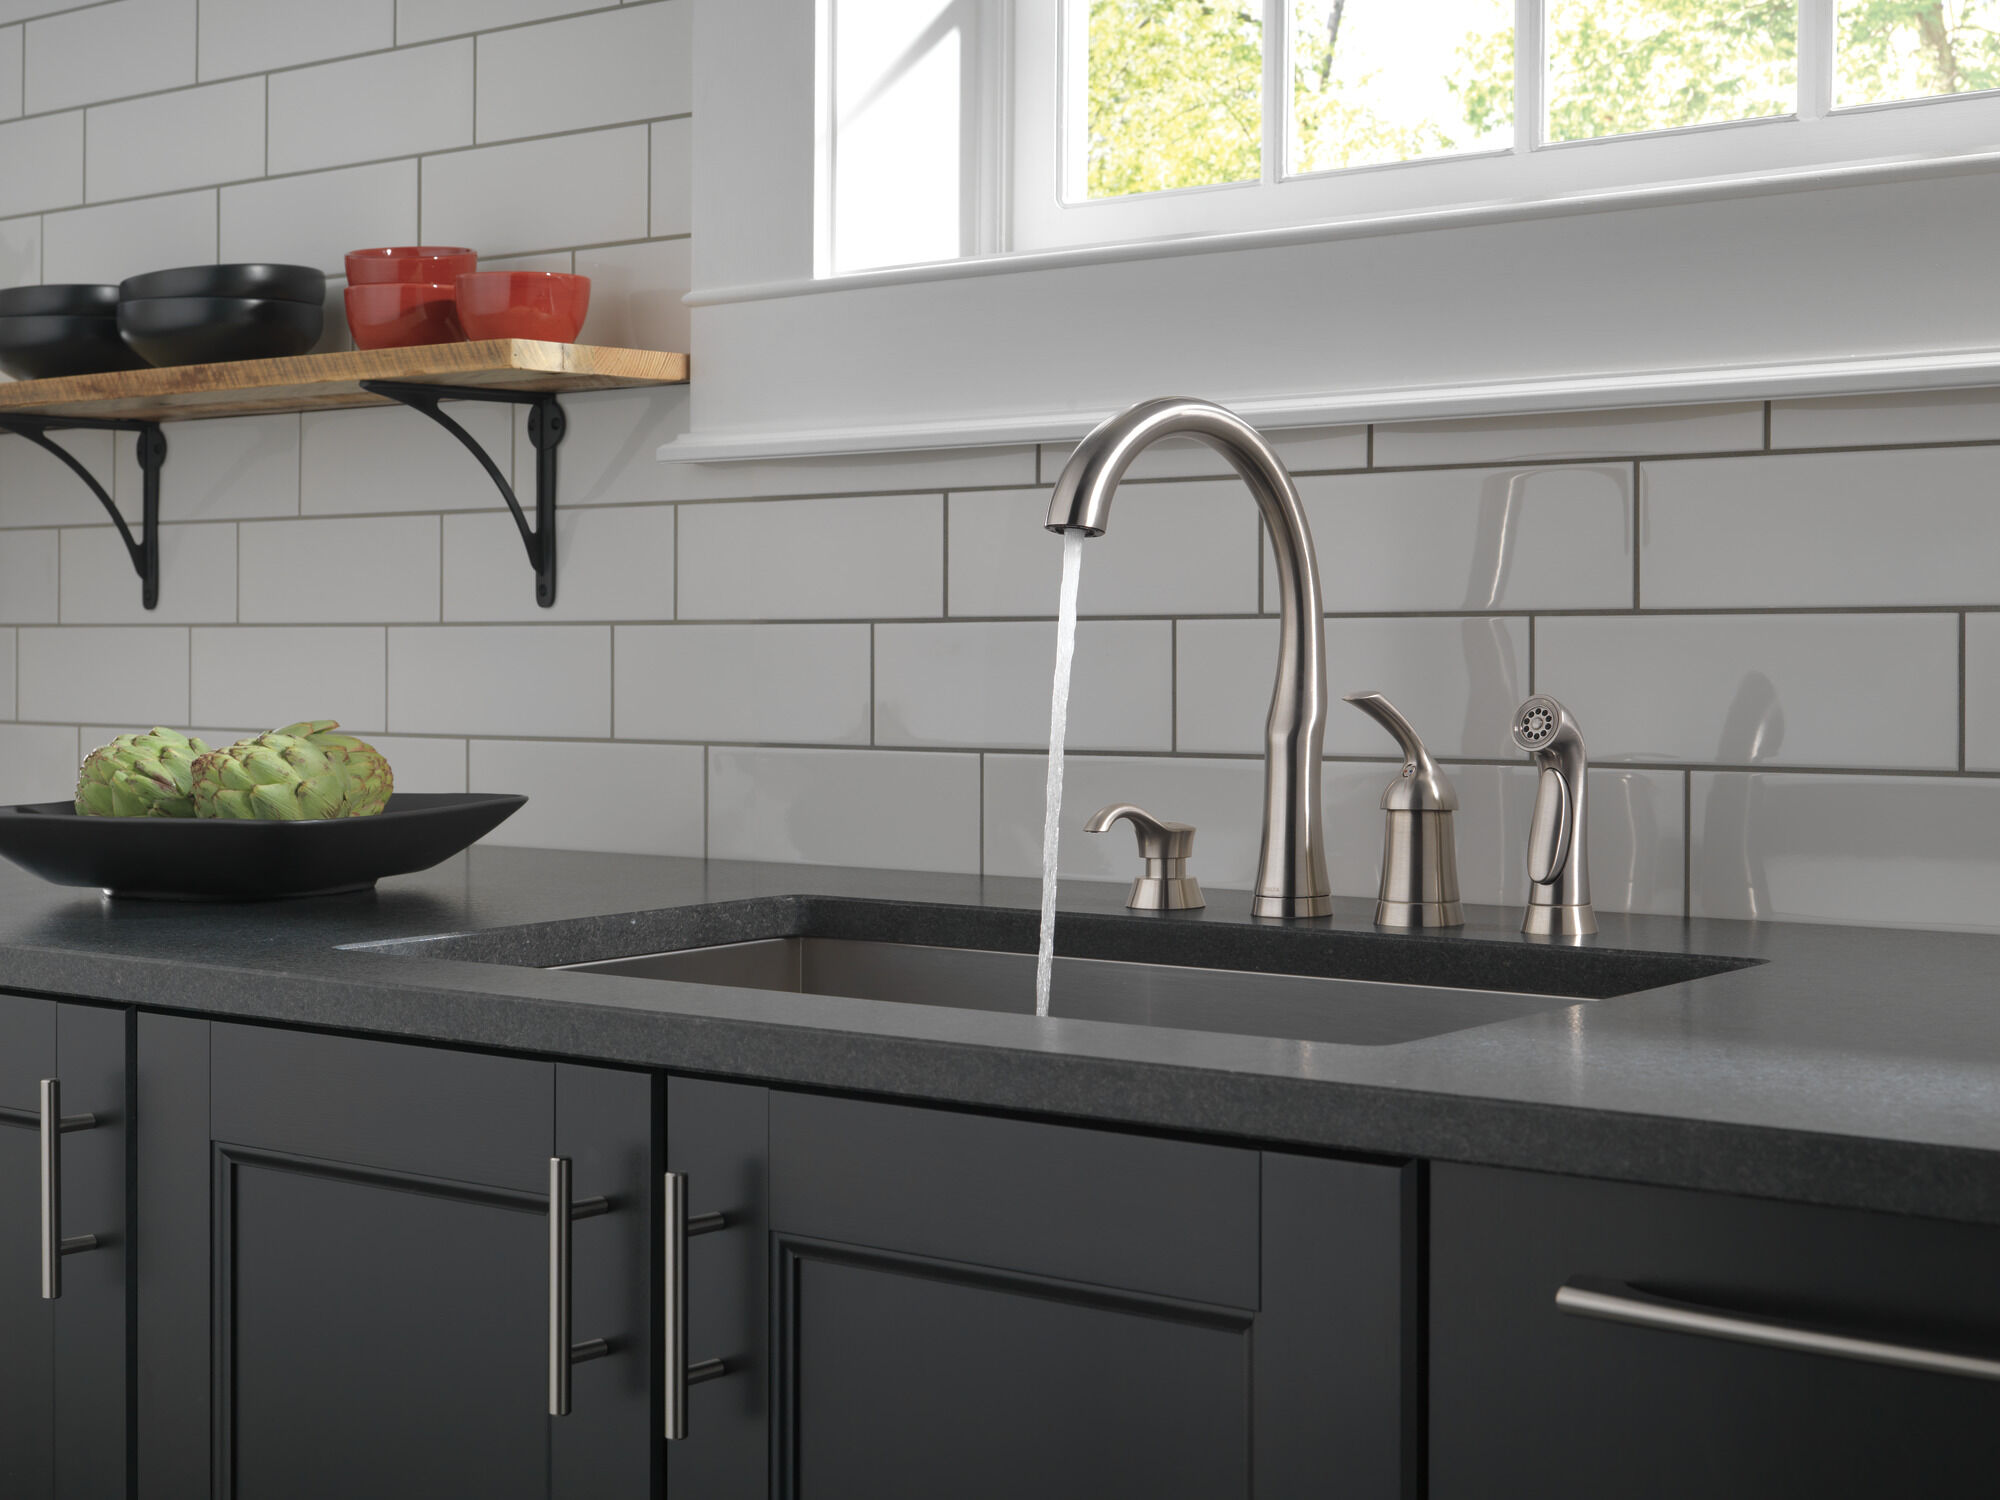 Single Handle Kitchen Faucet with Spray & Soap Dispenser in Stainless